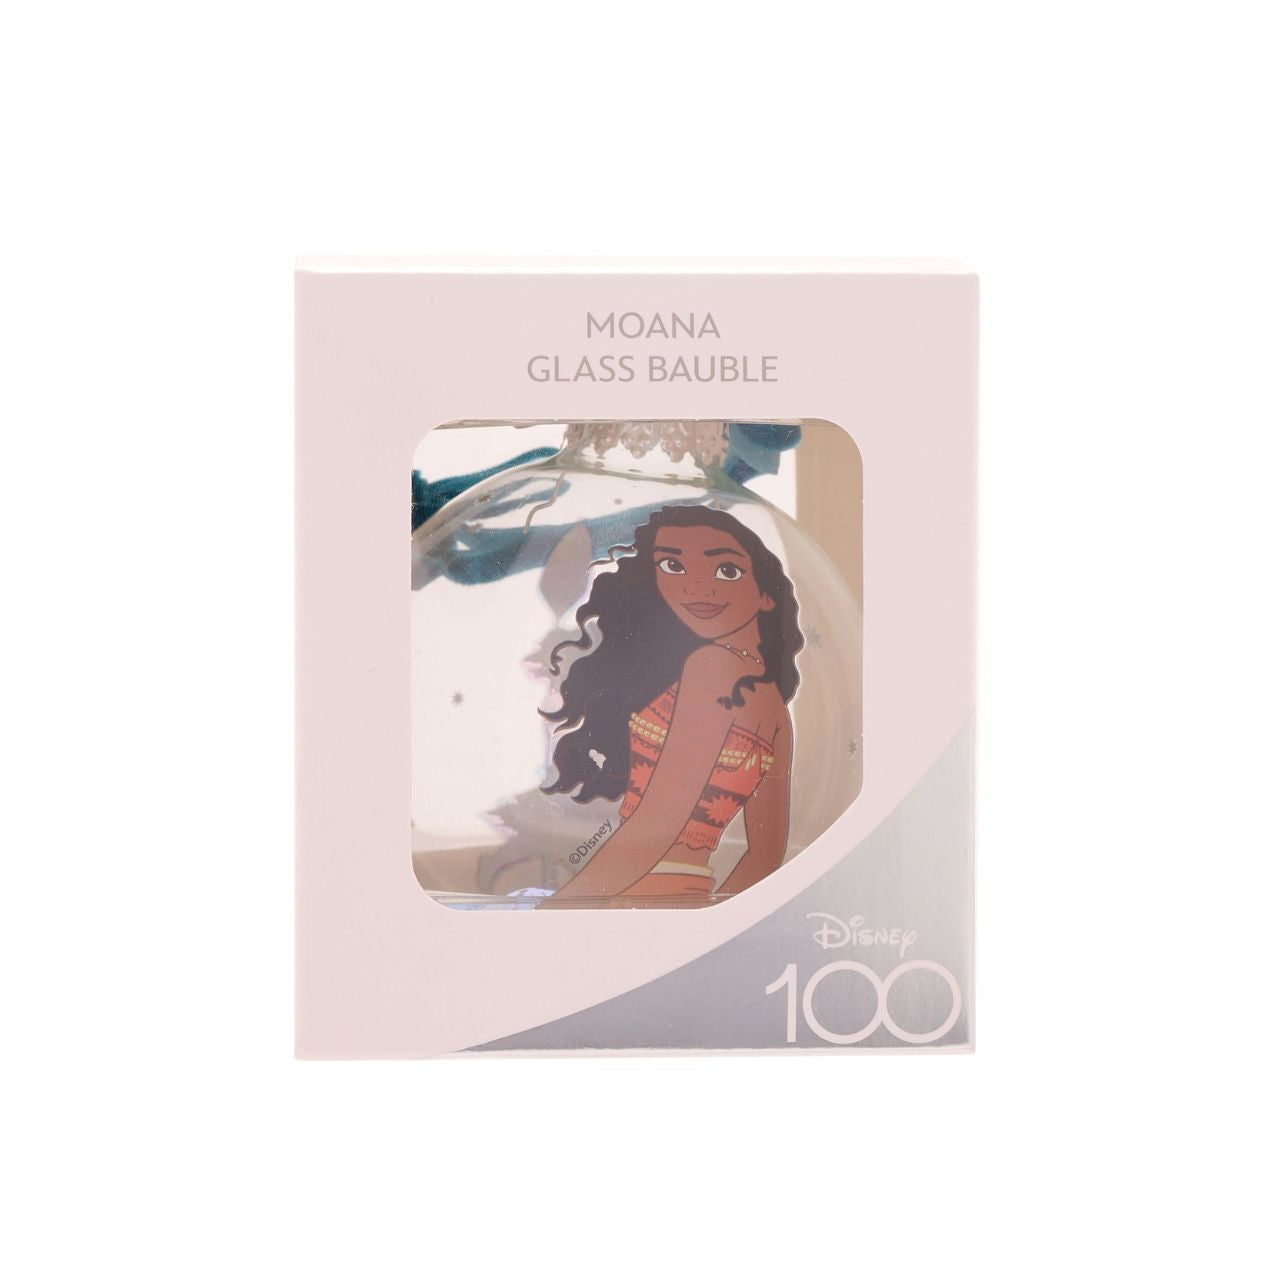 Disney 100th Anniversary Bauble - Moana  A Moana glass bauble from Disney 100 by DISNEY.  This limited edition tree decoration captures the true magic of Disney on its centenary and can be enjoyed by fans of all ages at Christmas.